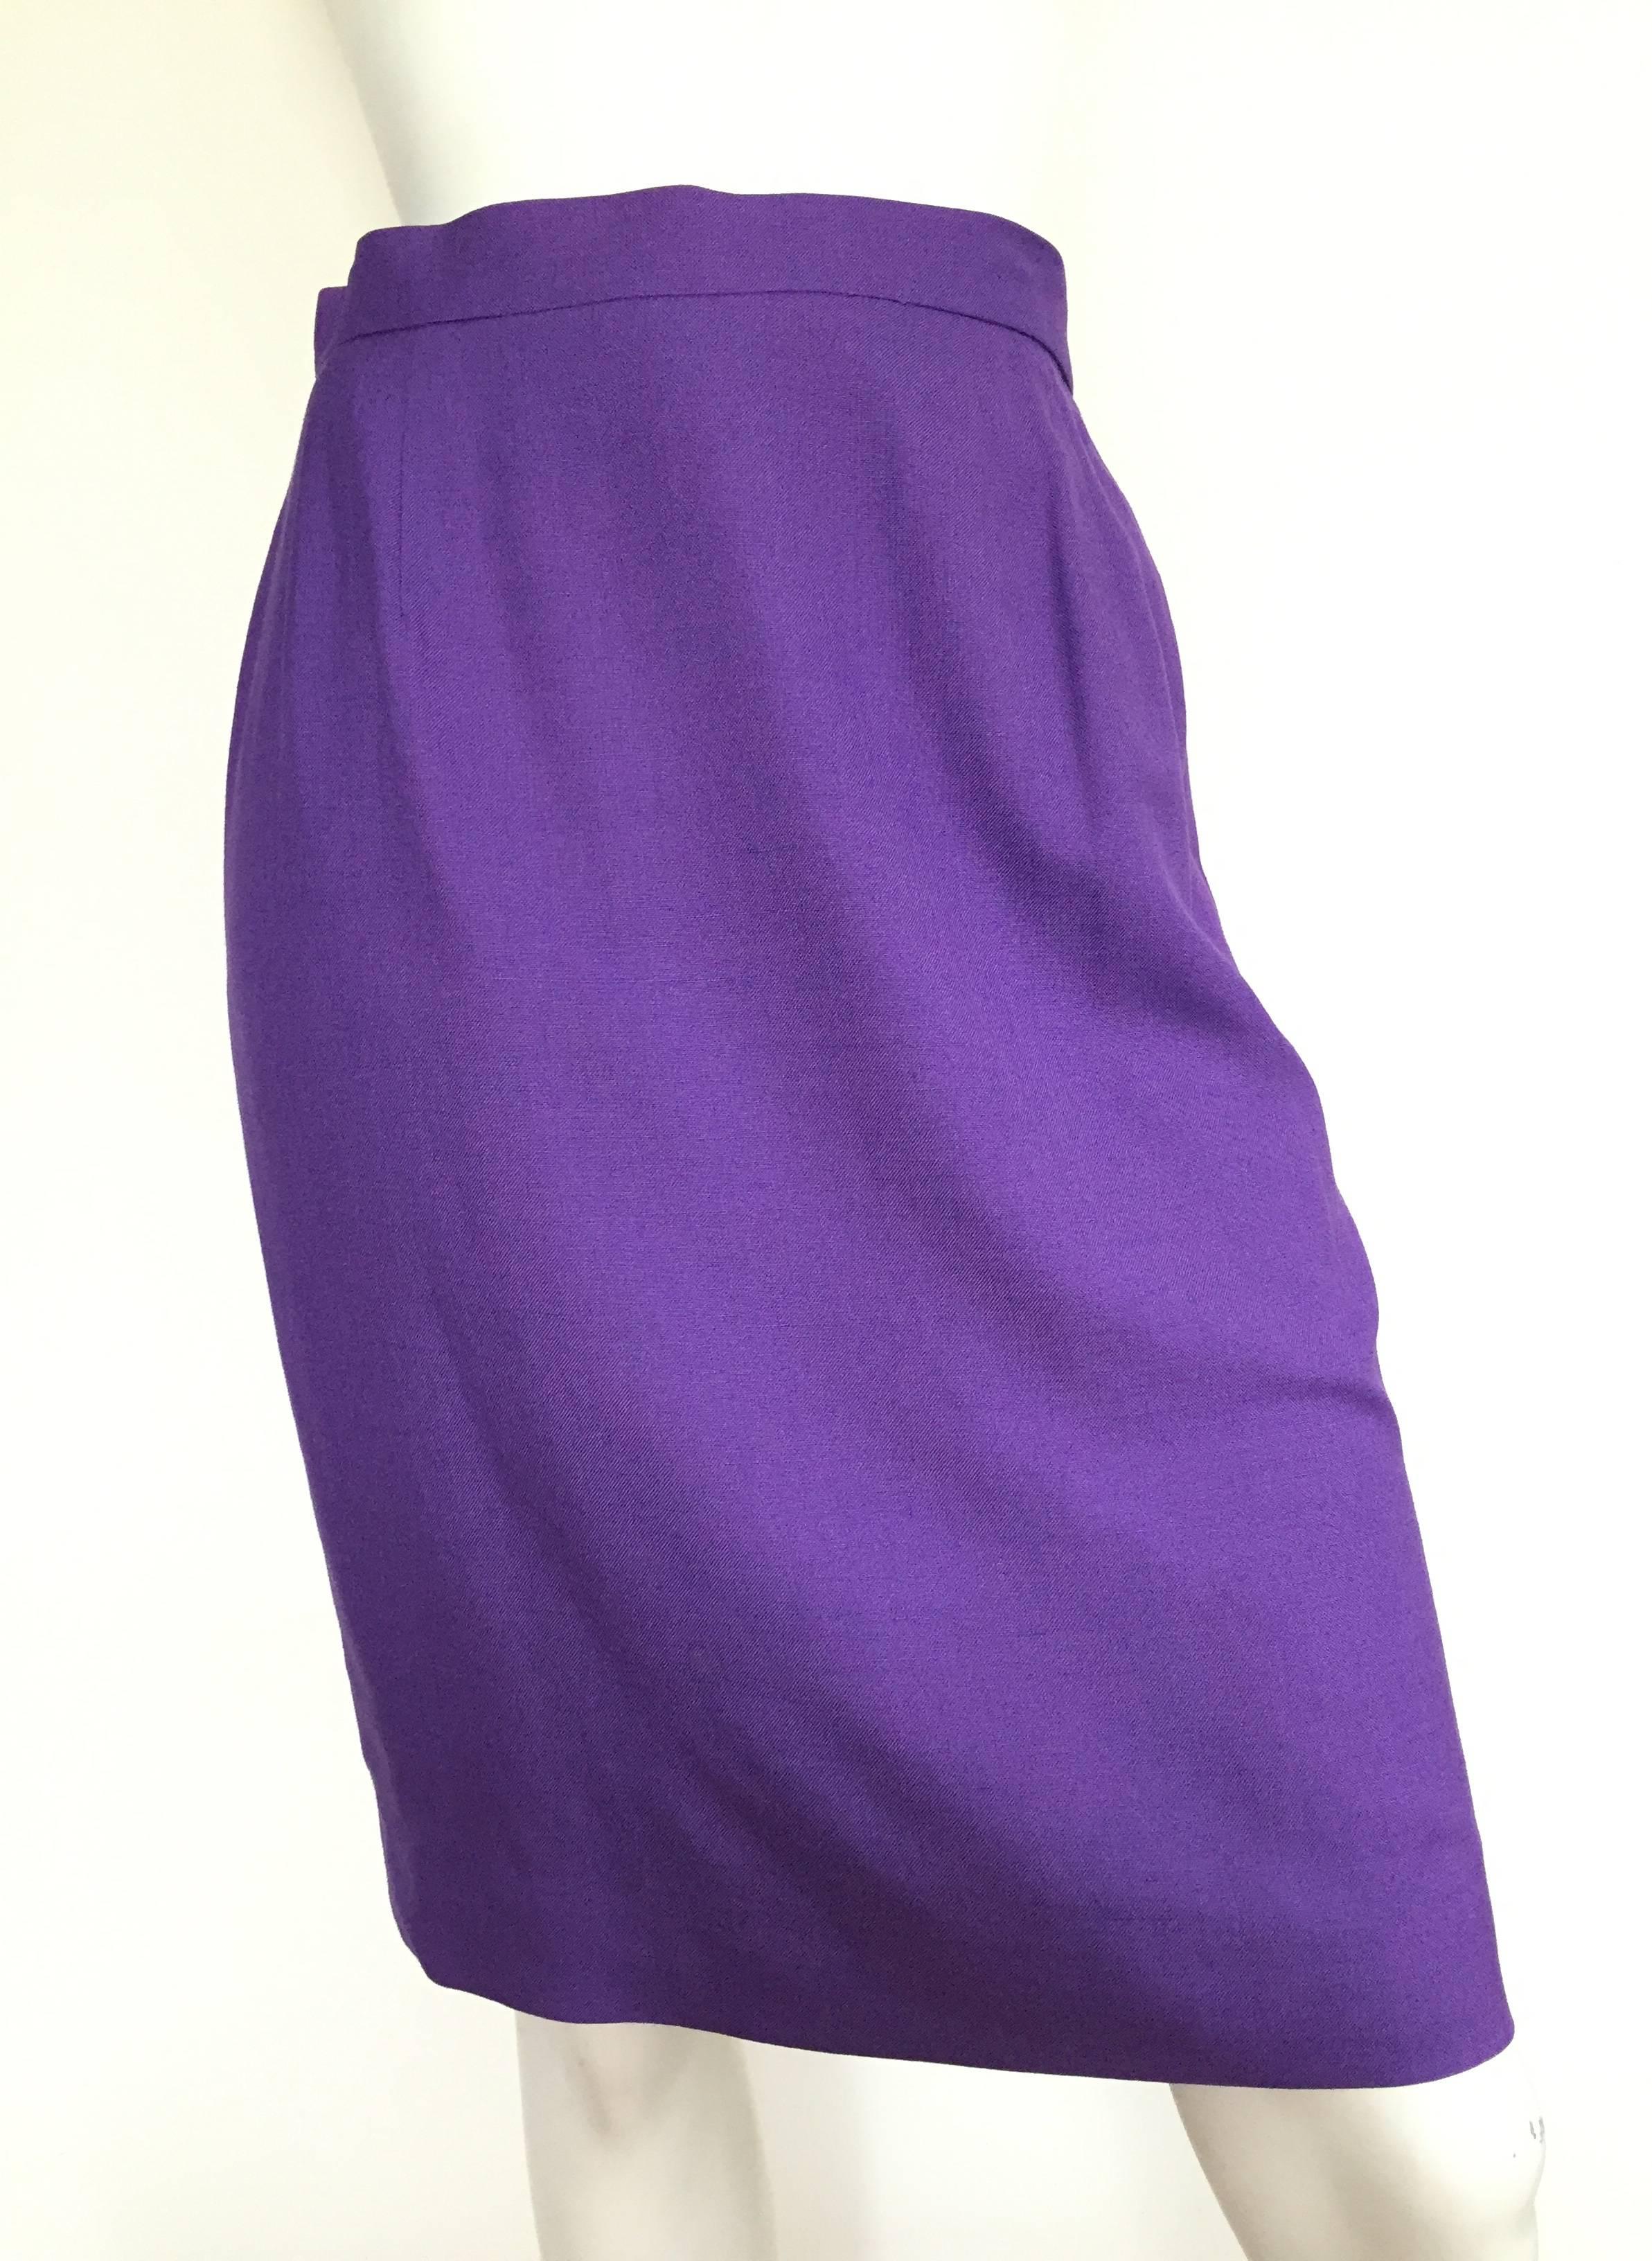 Balenciaga Paris 1980s rayon / linen violet skirt is a French size 40 but fits like a modern USA size 4/6 ( Please see & use the measurements below so you can properly measure your lovely body). Button and zipper in back.  Made in France and